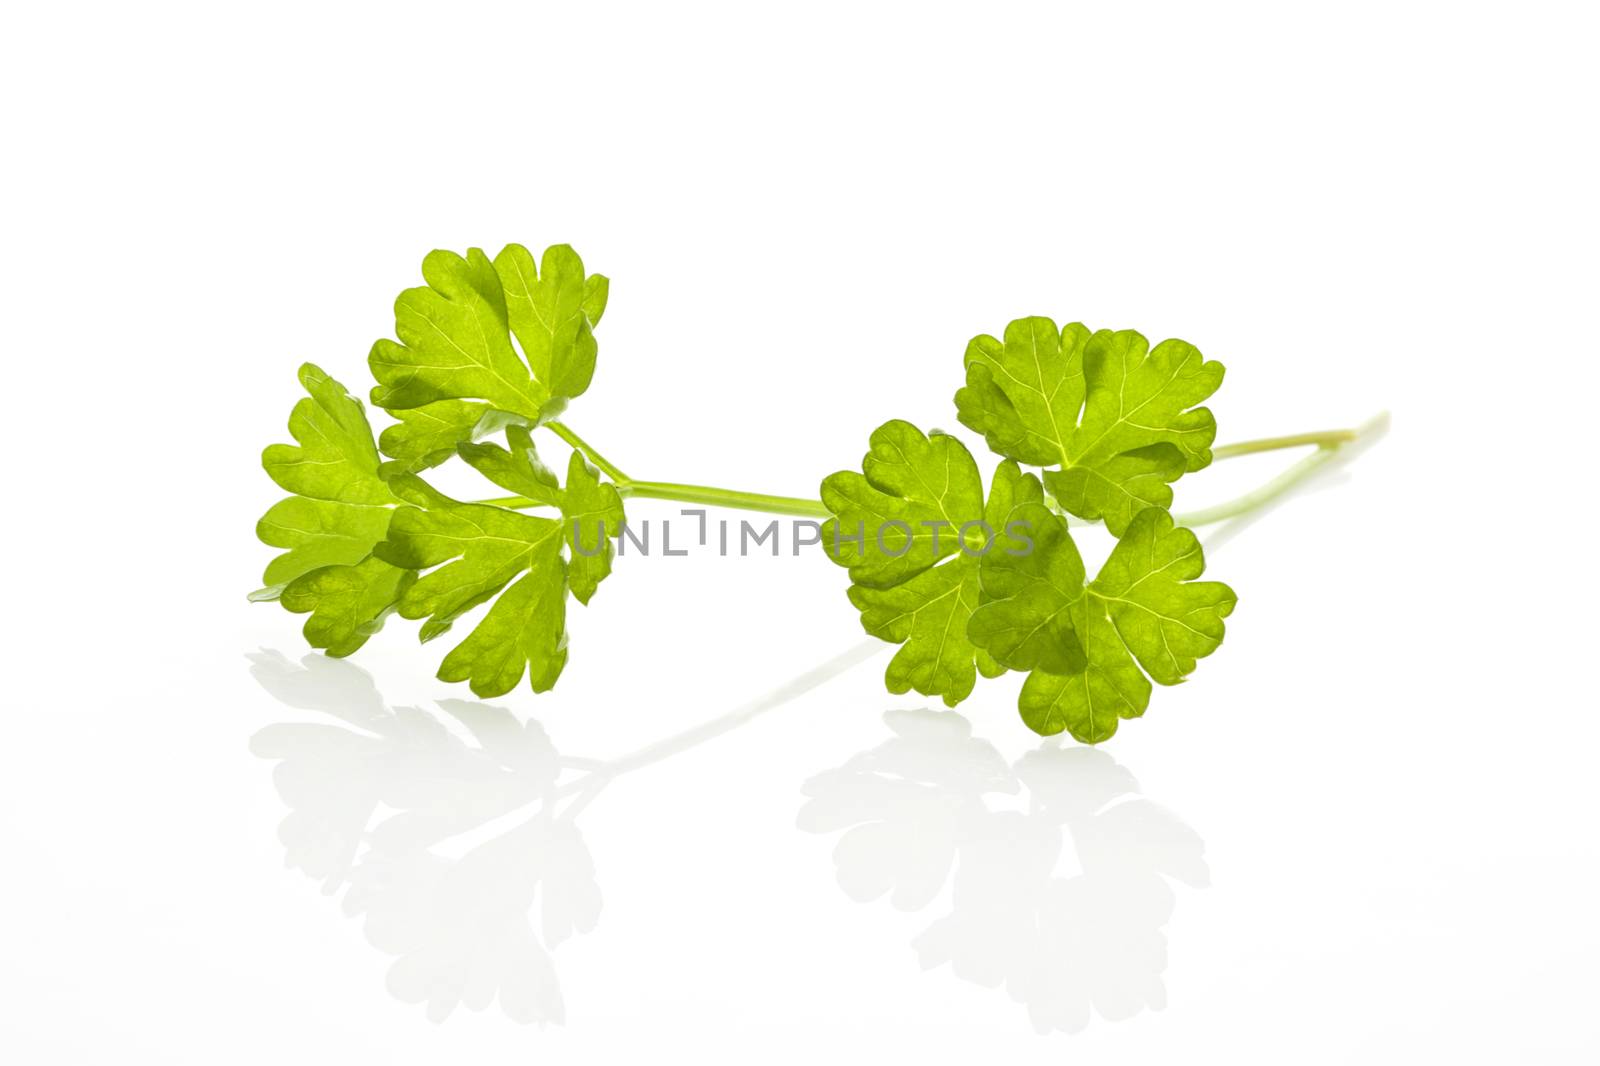 Parsley leaf isolated on white background. Aromatic culinary herb.